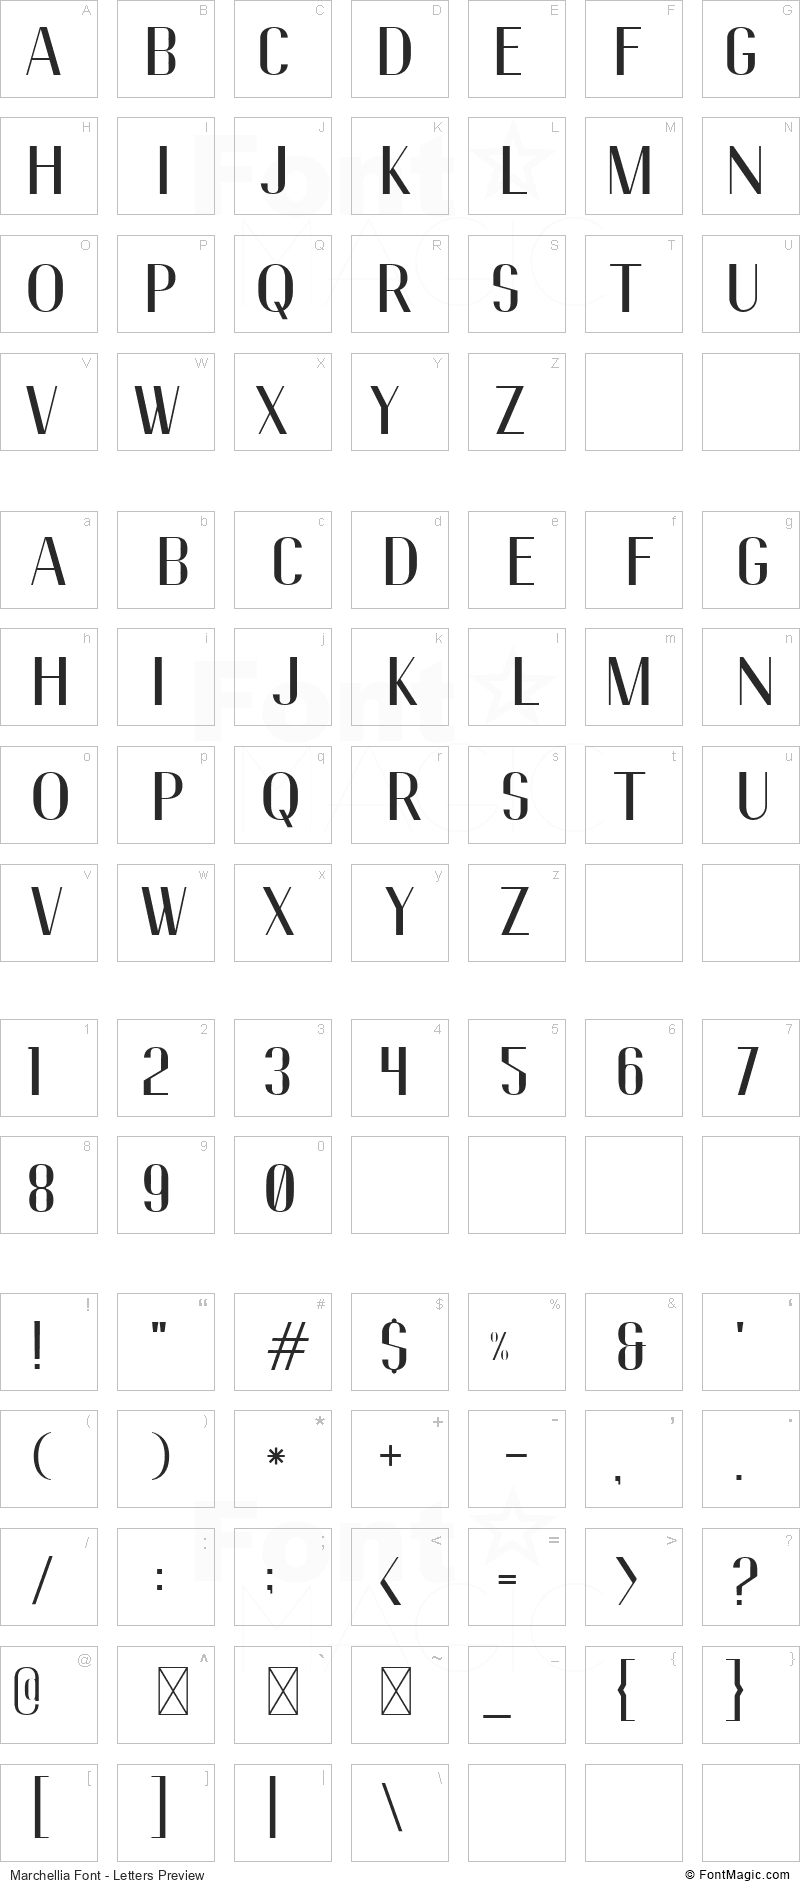 Marchellia Font - All Latters Preview Chart